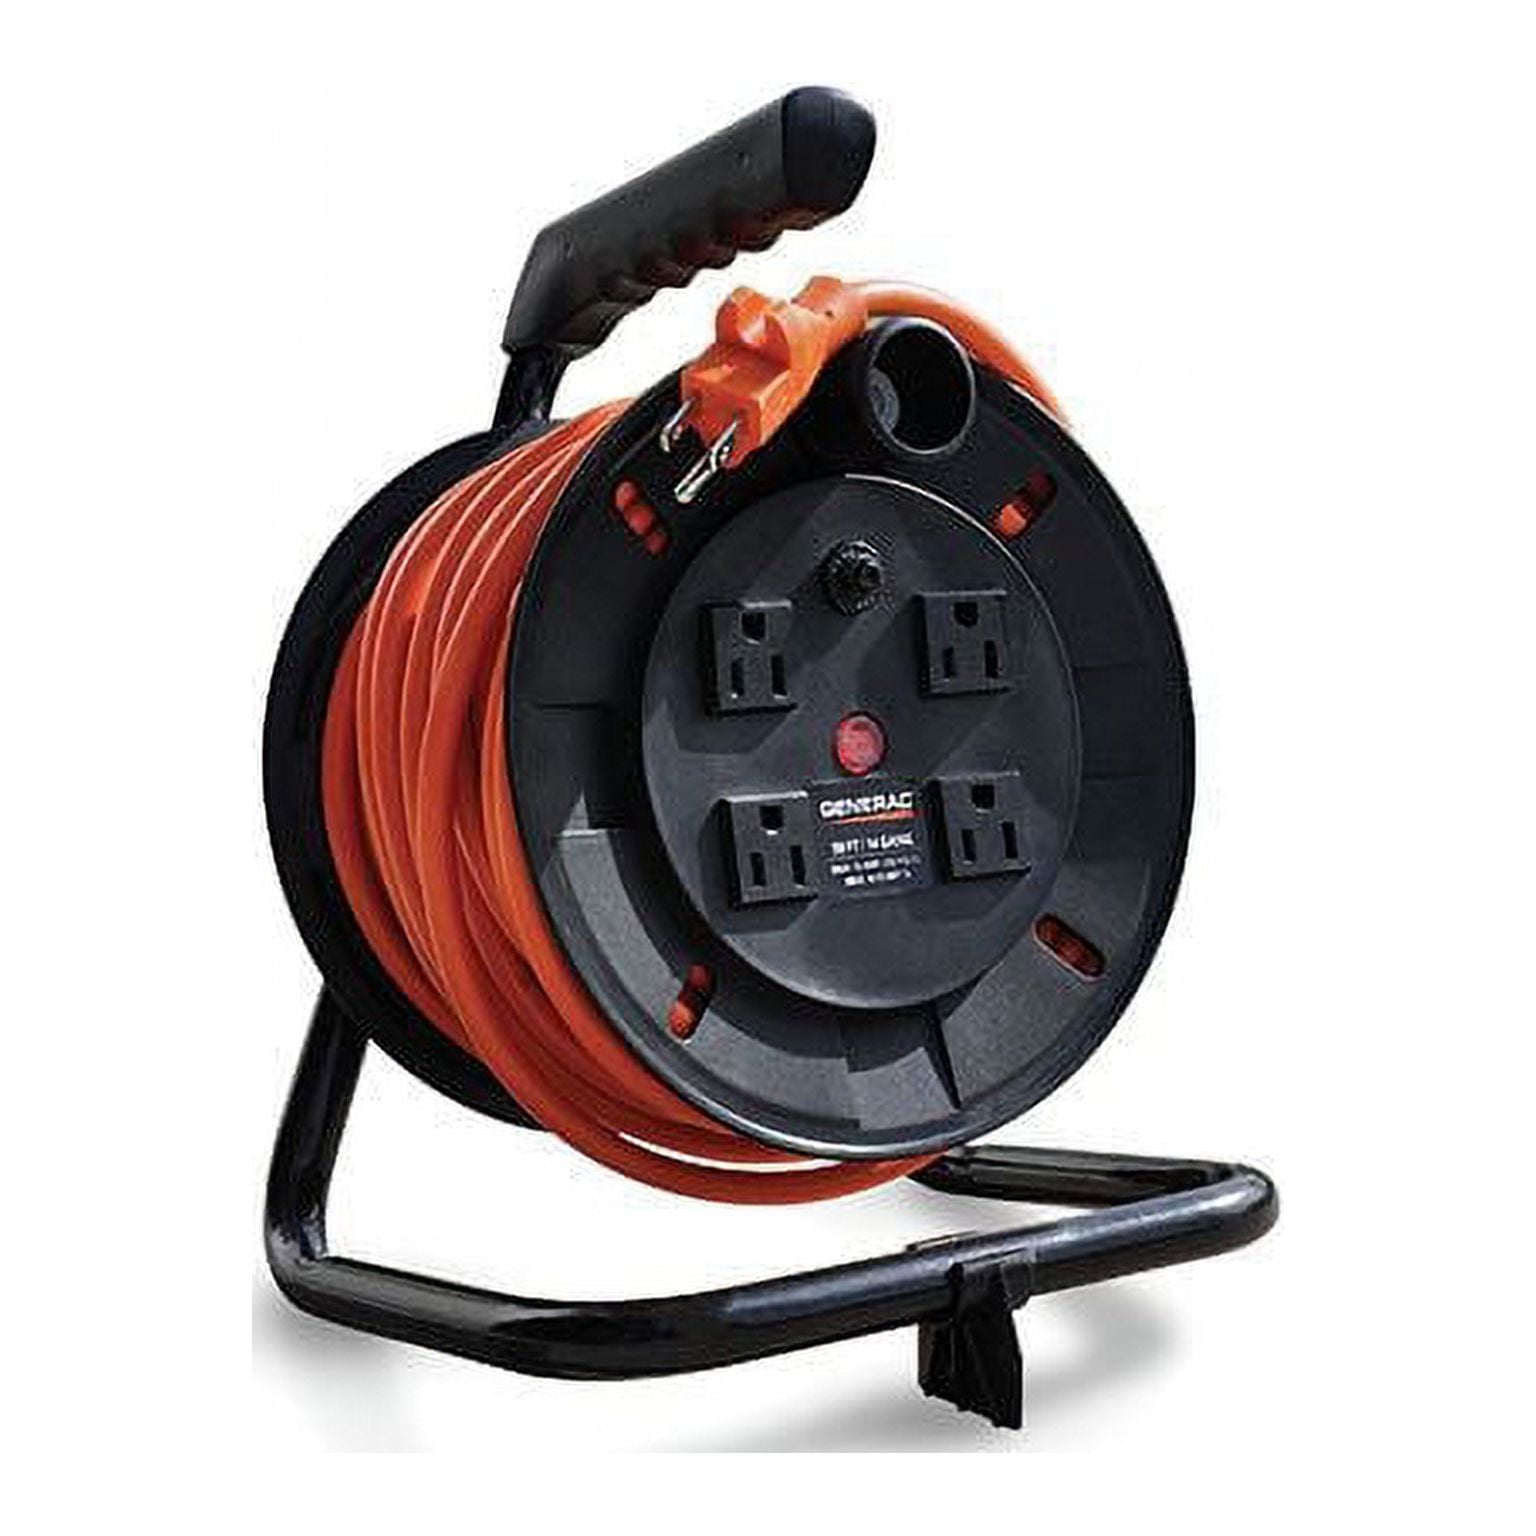 Generac 6883 - 50 Ft. Power Cord Reel for Portable Generators, 4 Outlets